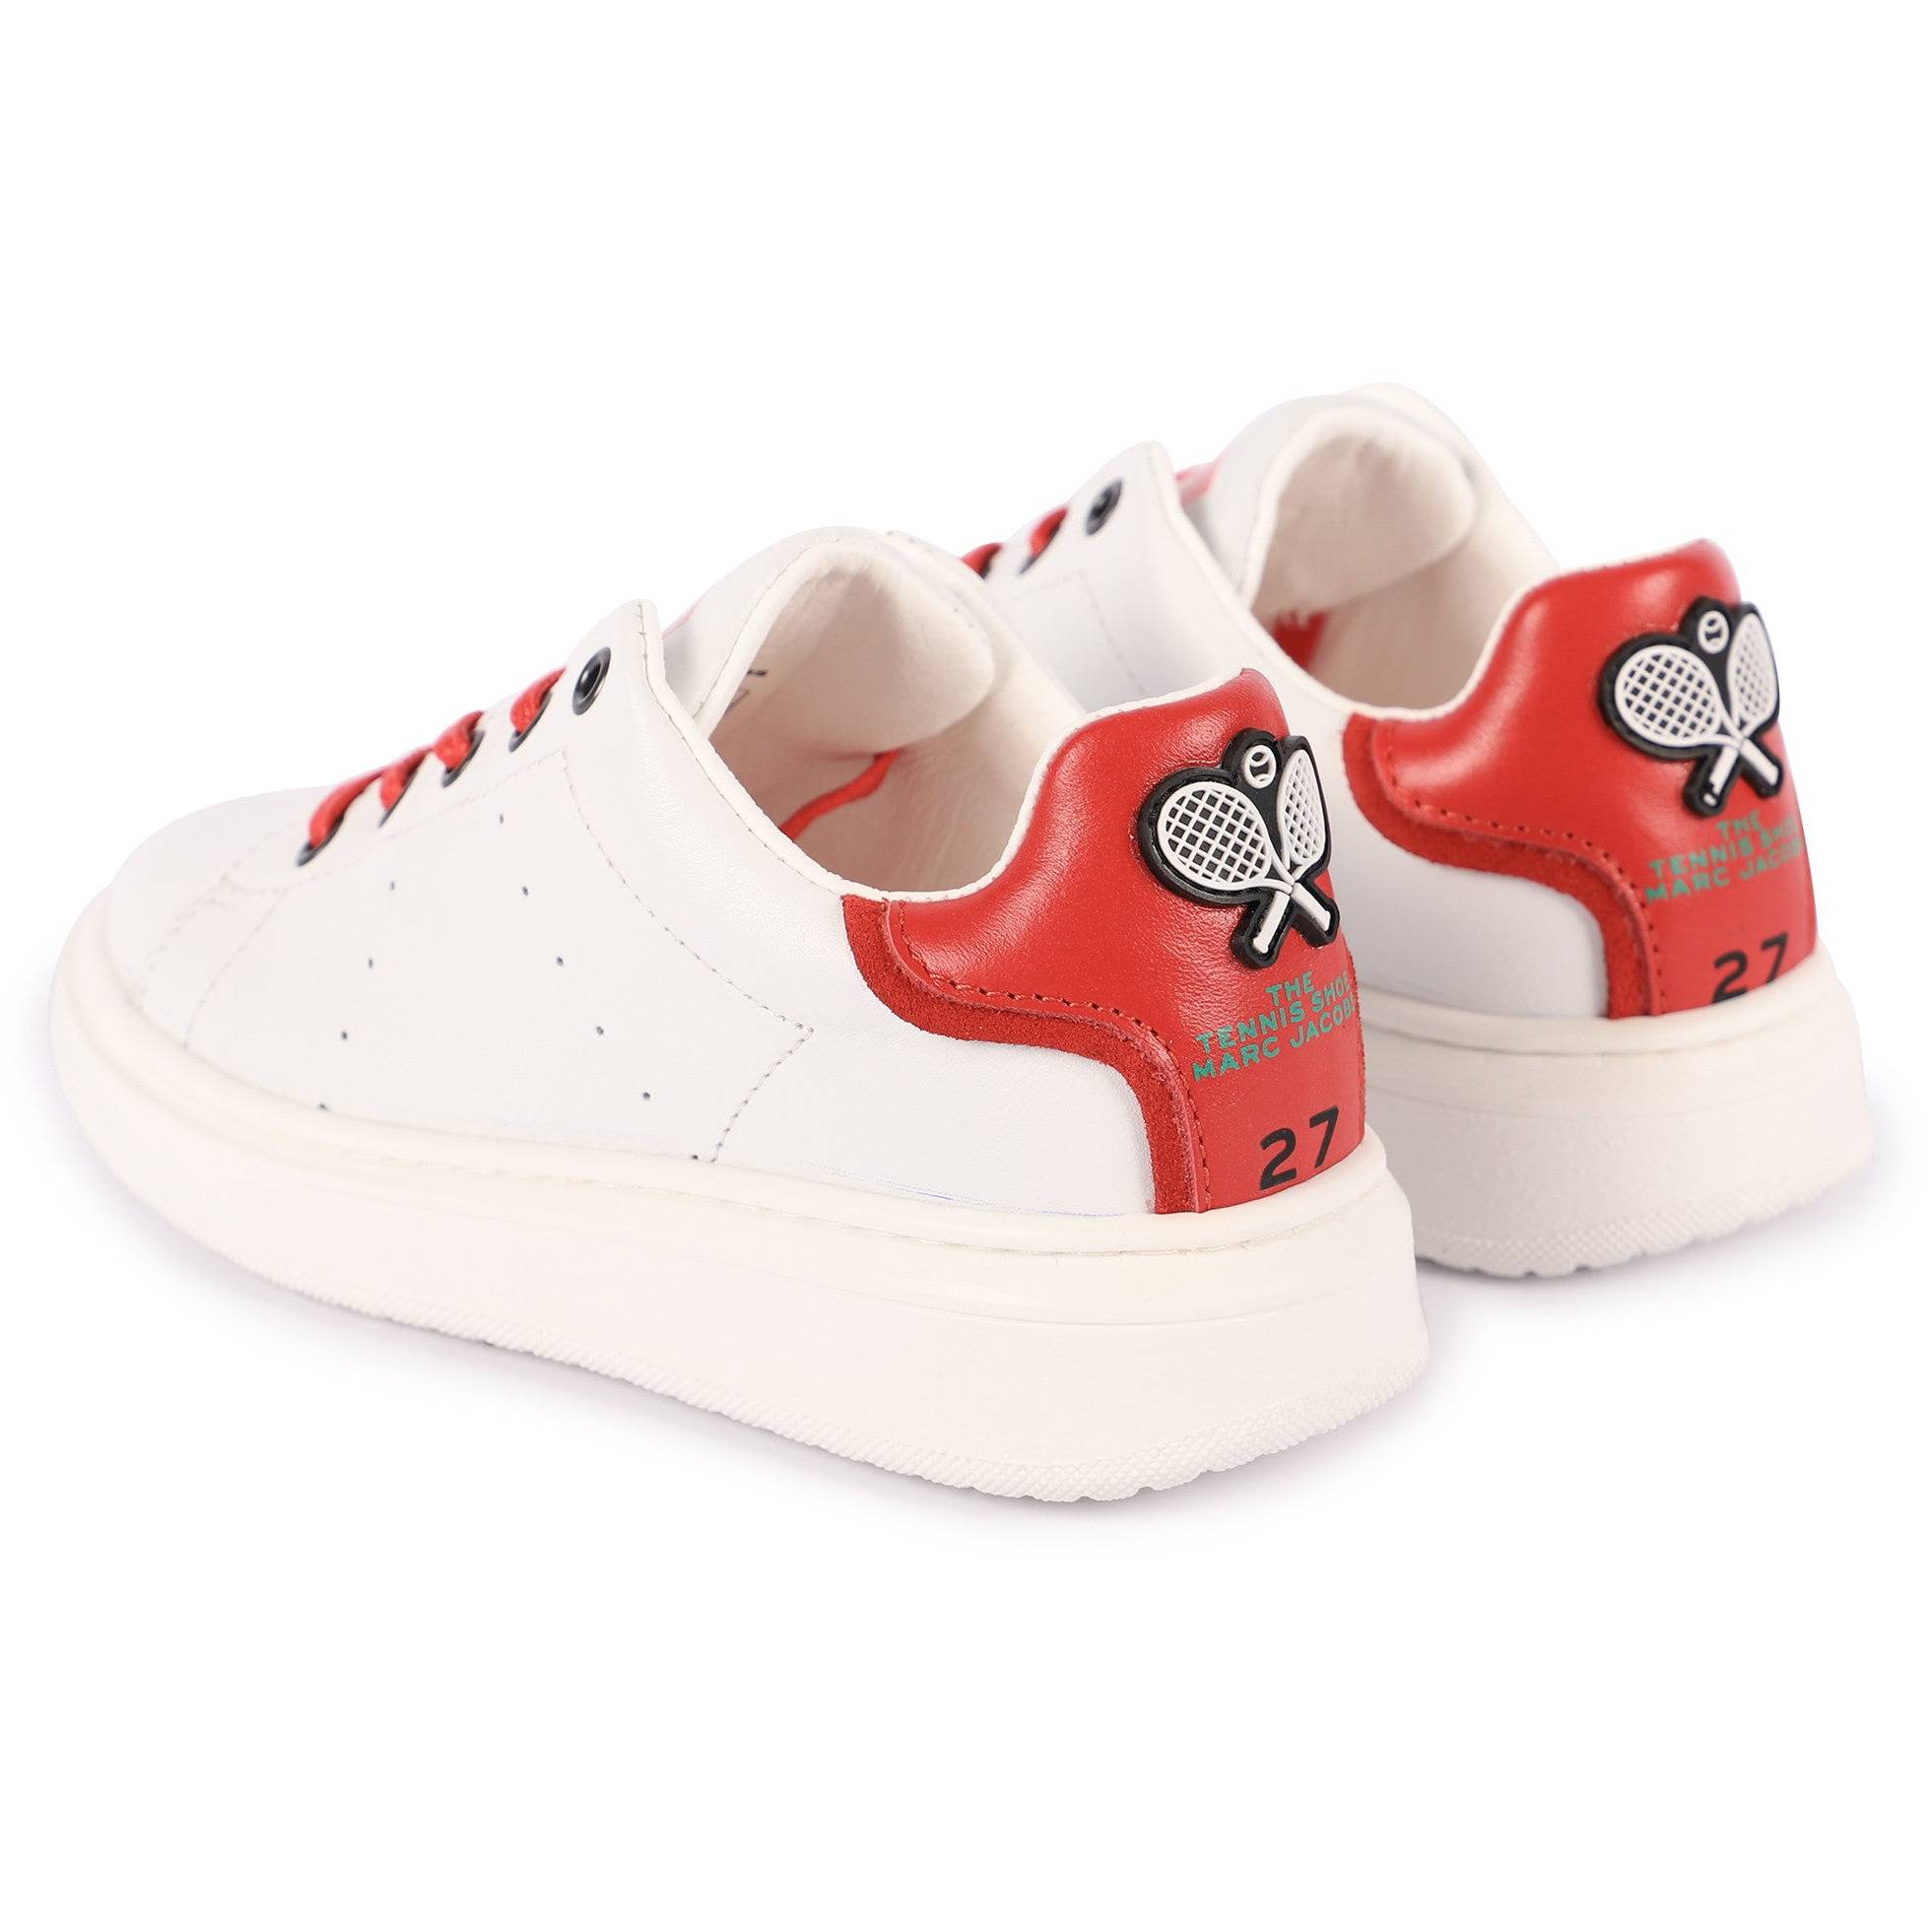 LOGO LEATHER SNEAKERS IN WHITE AND RED